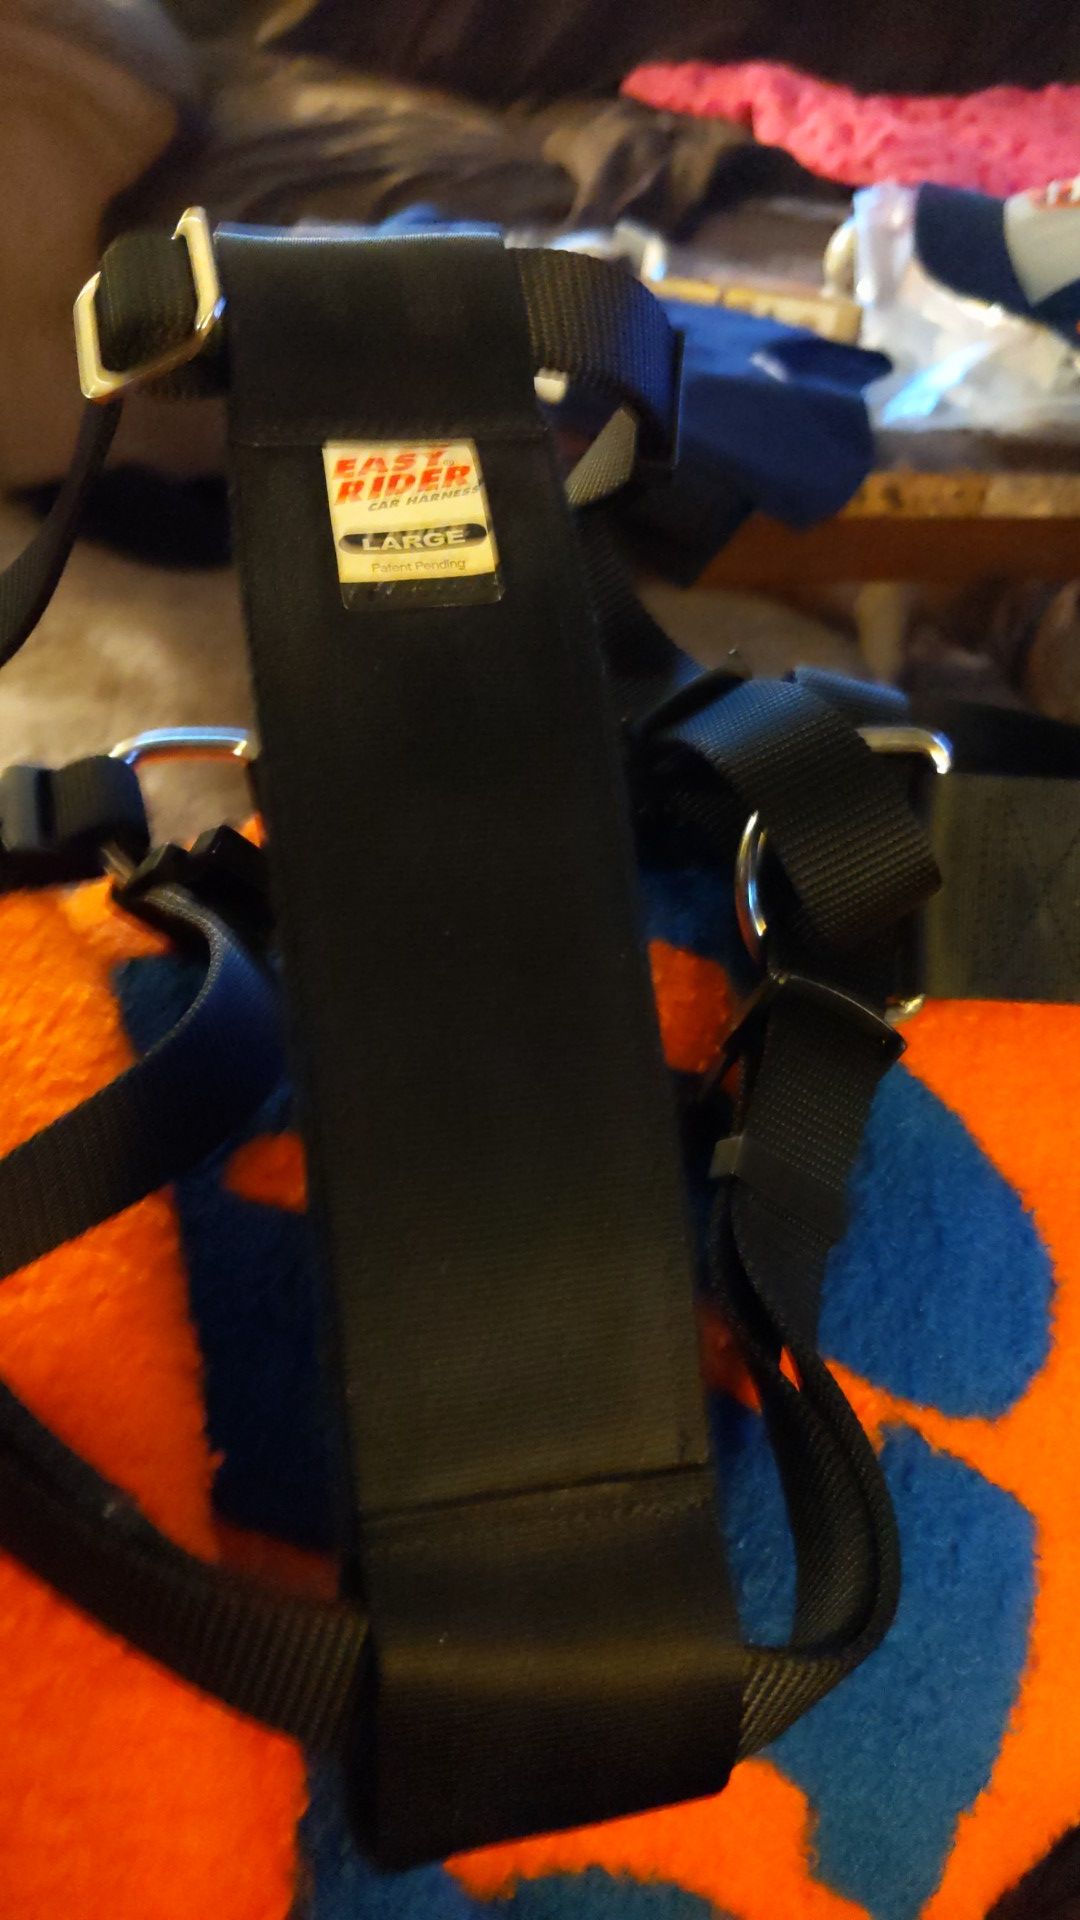 Easy Rider car harness Large